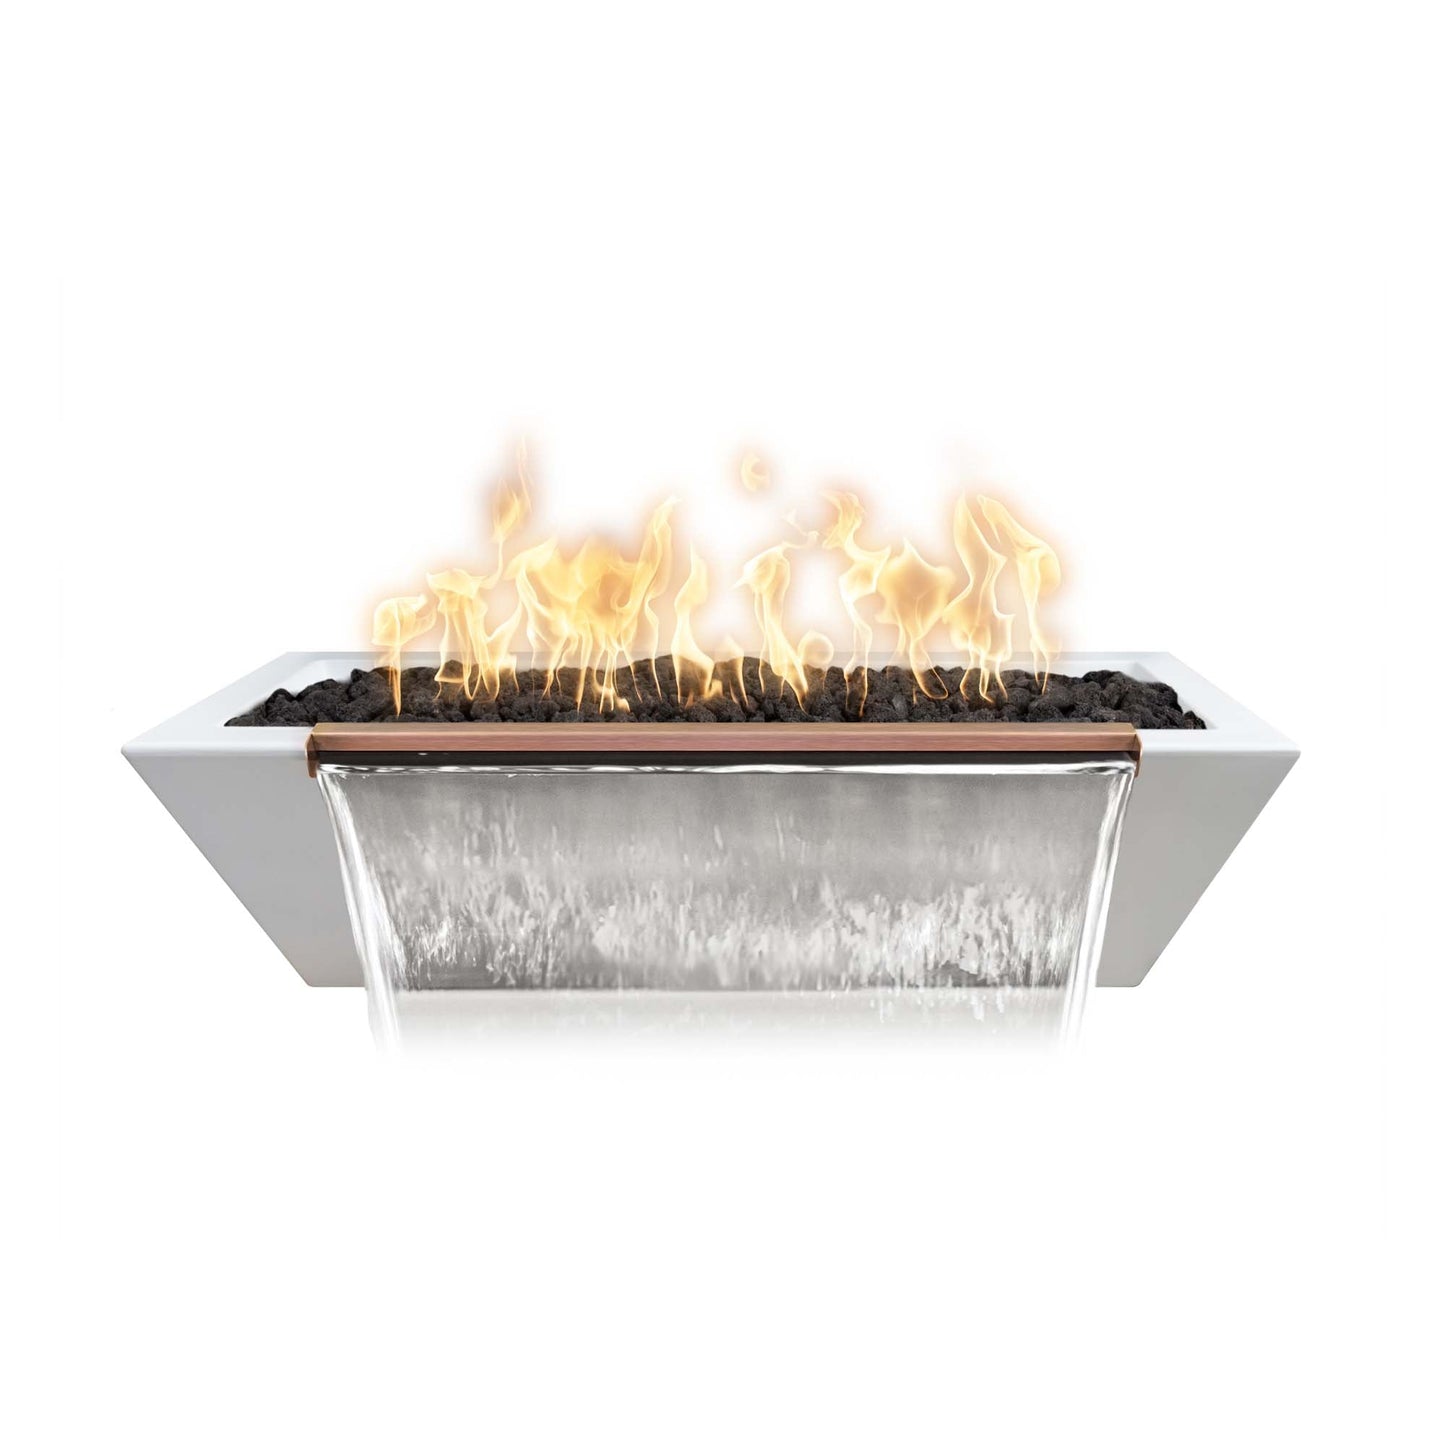 The Outdoor Plus Linear Maya 60" Rustic Moss Stone GFRC Concrete Liquid Propane Fire & Water Bowl with 12V Electronic Ignition